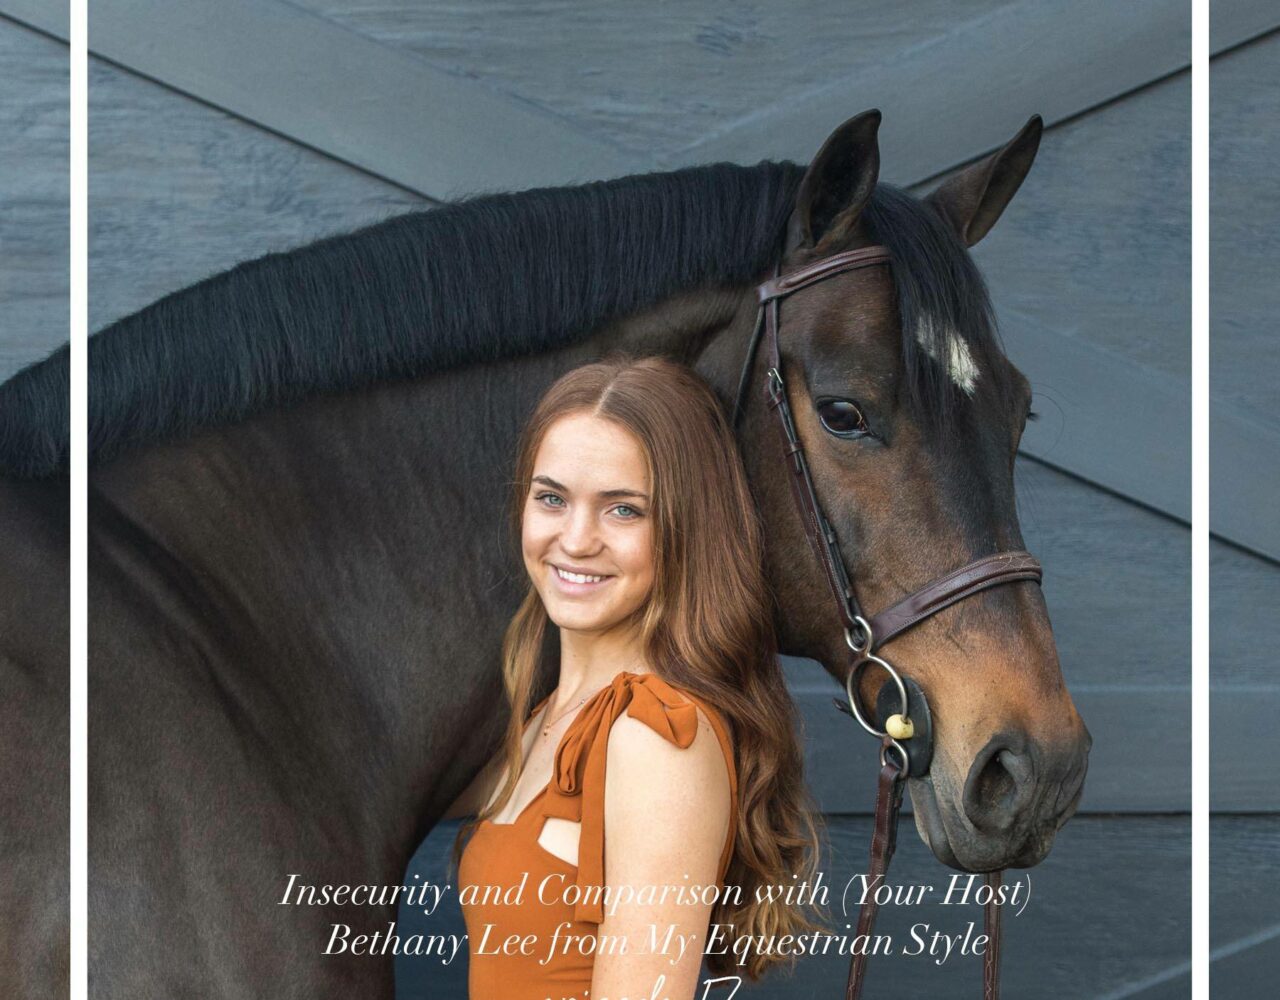 Insecurity and Comparison with (Your Host) Bethany Lee from My Equestrian Style